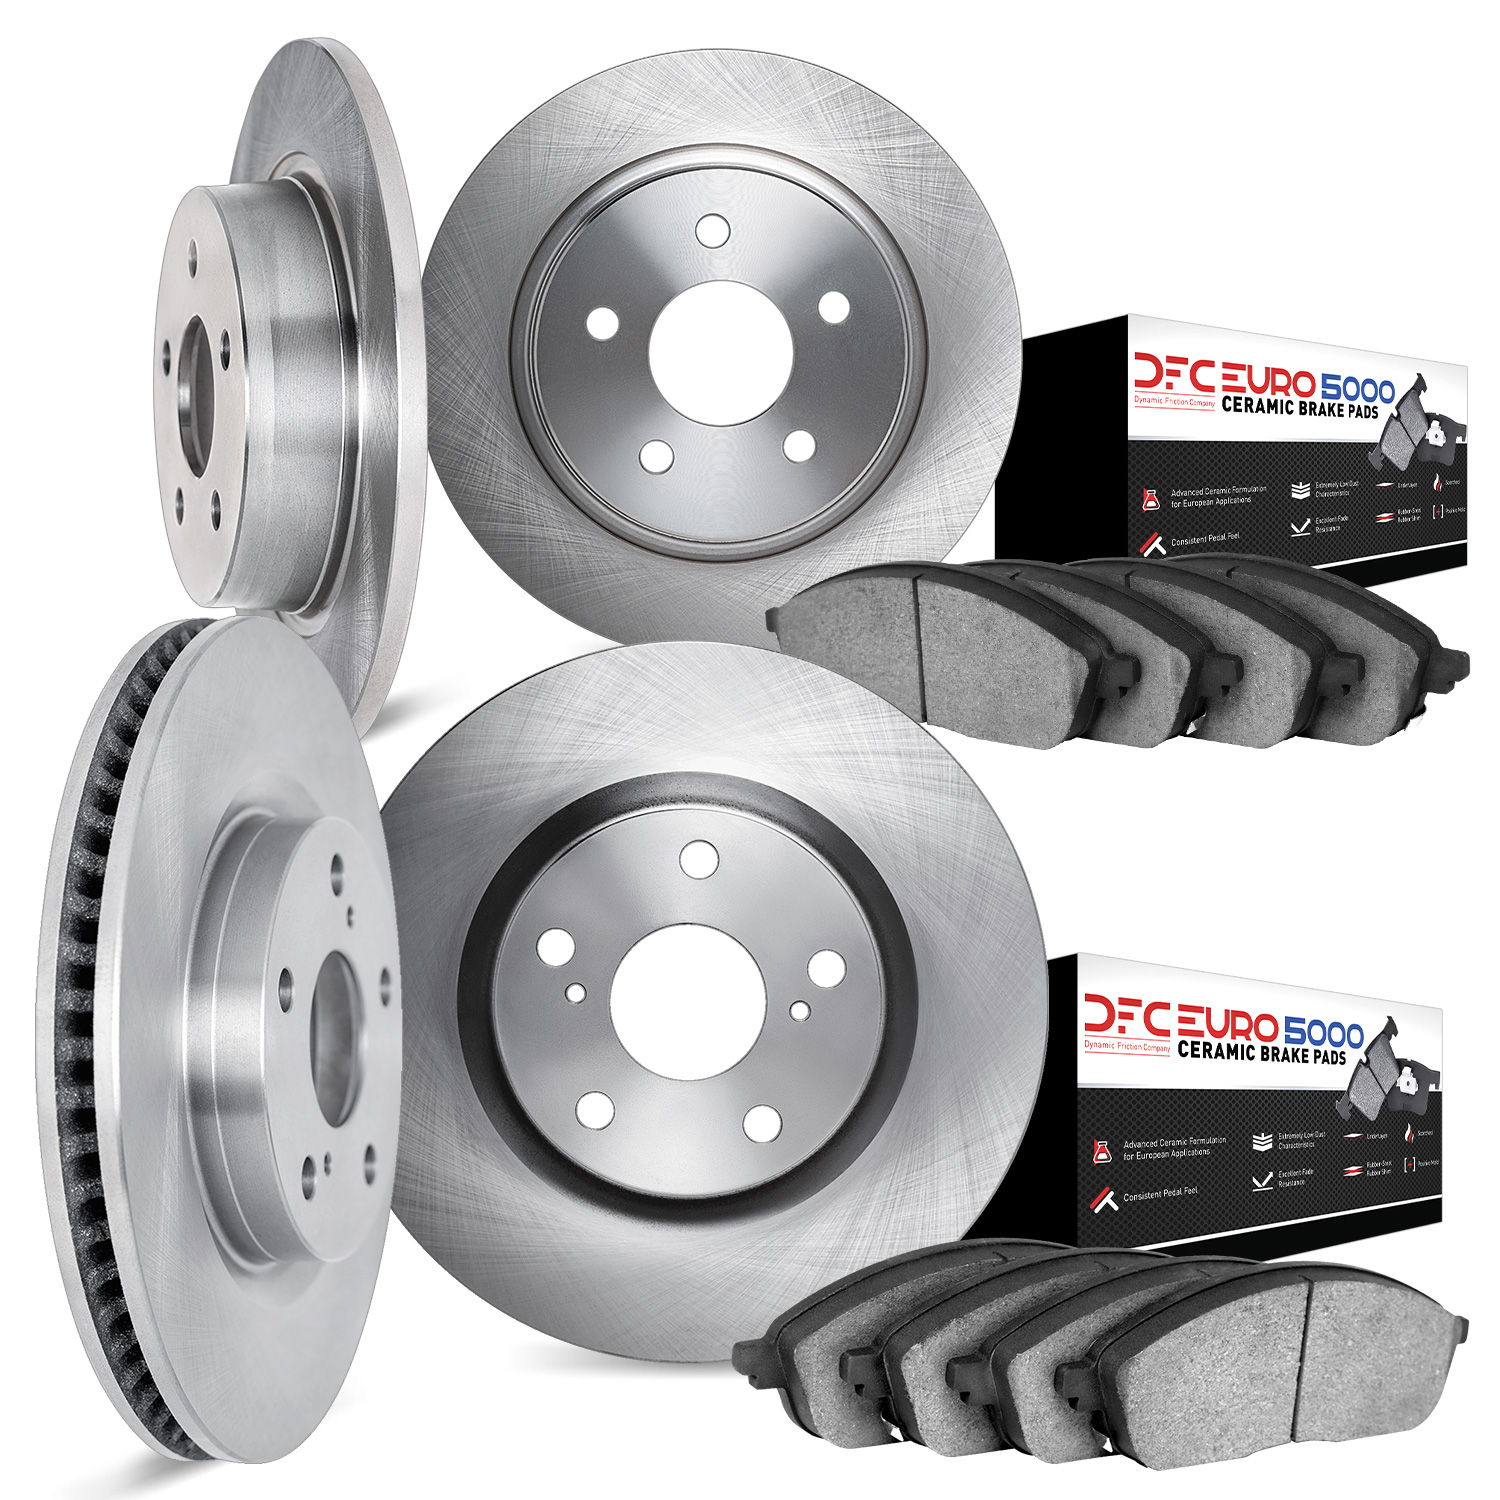 6604-92002 Brake Rotors w/5000 Euro Ceramic Brake Pads, 2006-2007 BMW, Position: Front and Rear